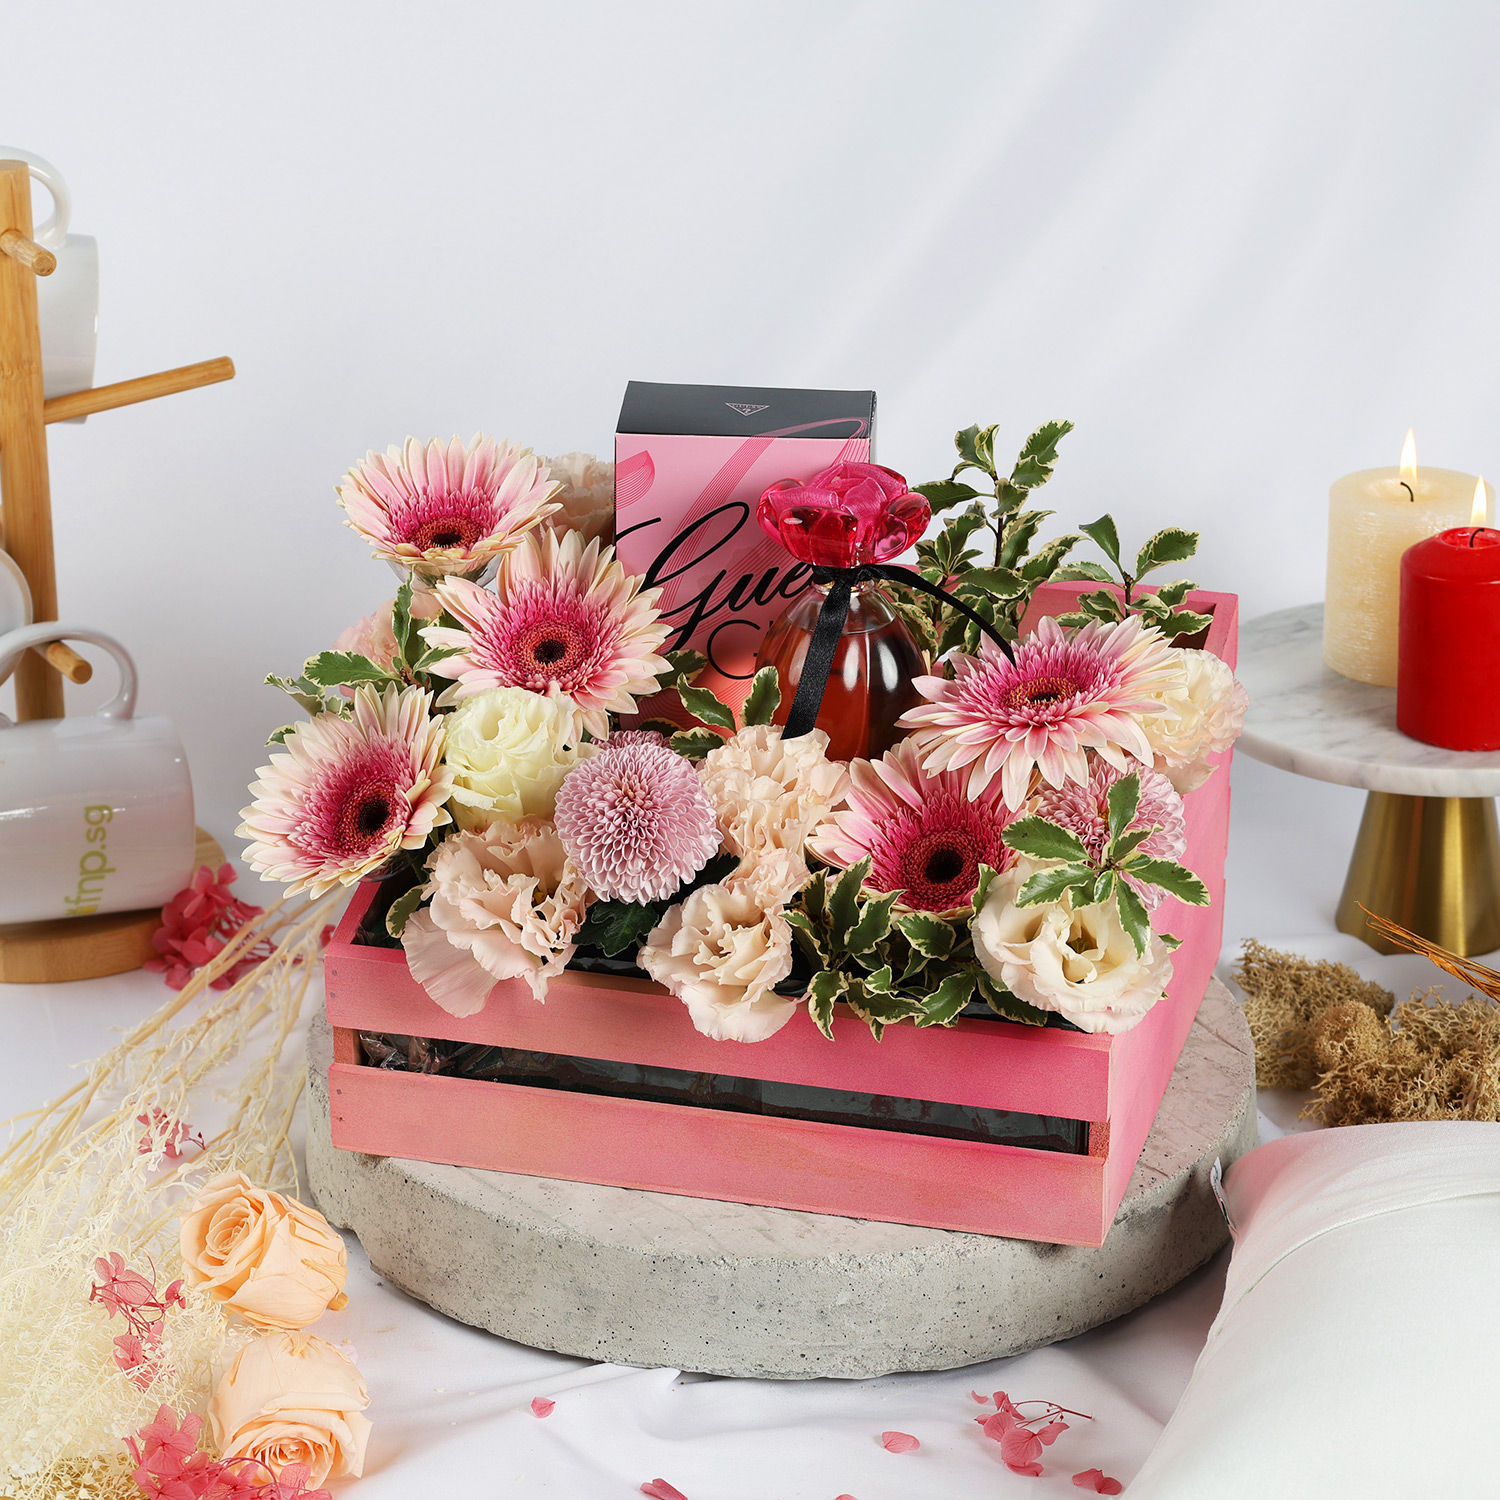 Guess Girl Perfume and Flowers Delivery in Singapore - FNP SG